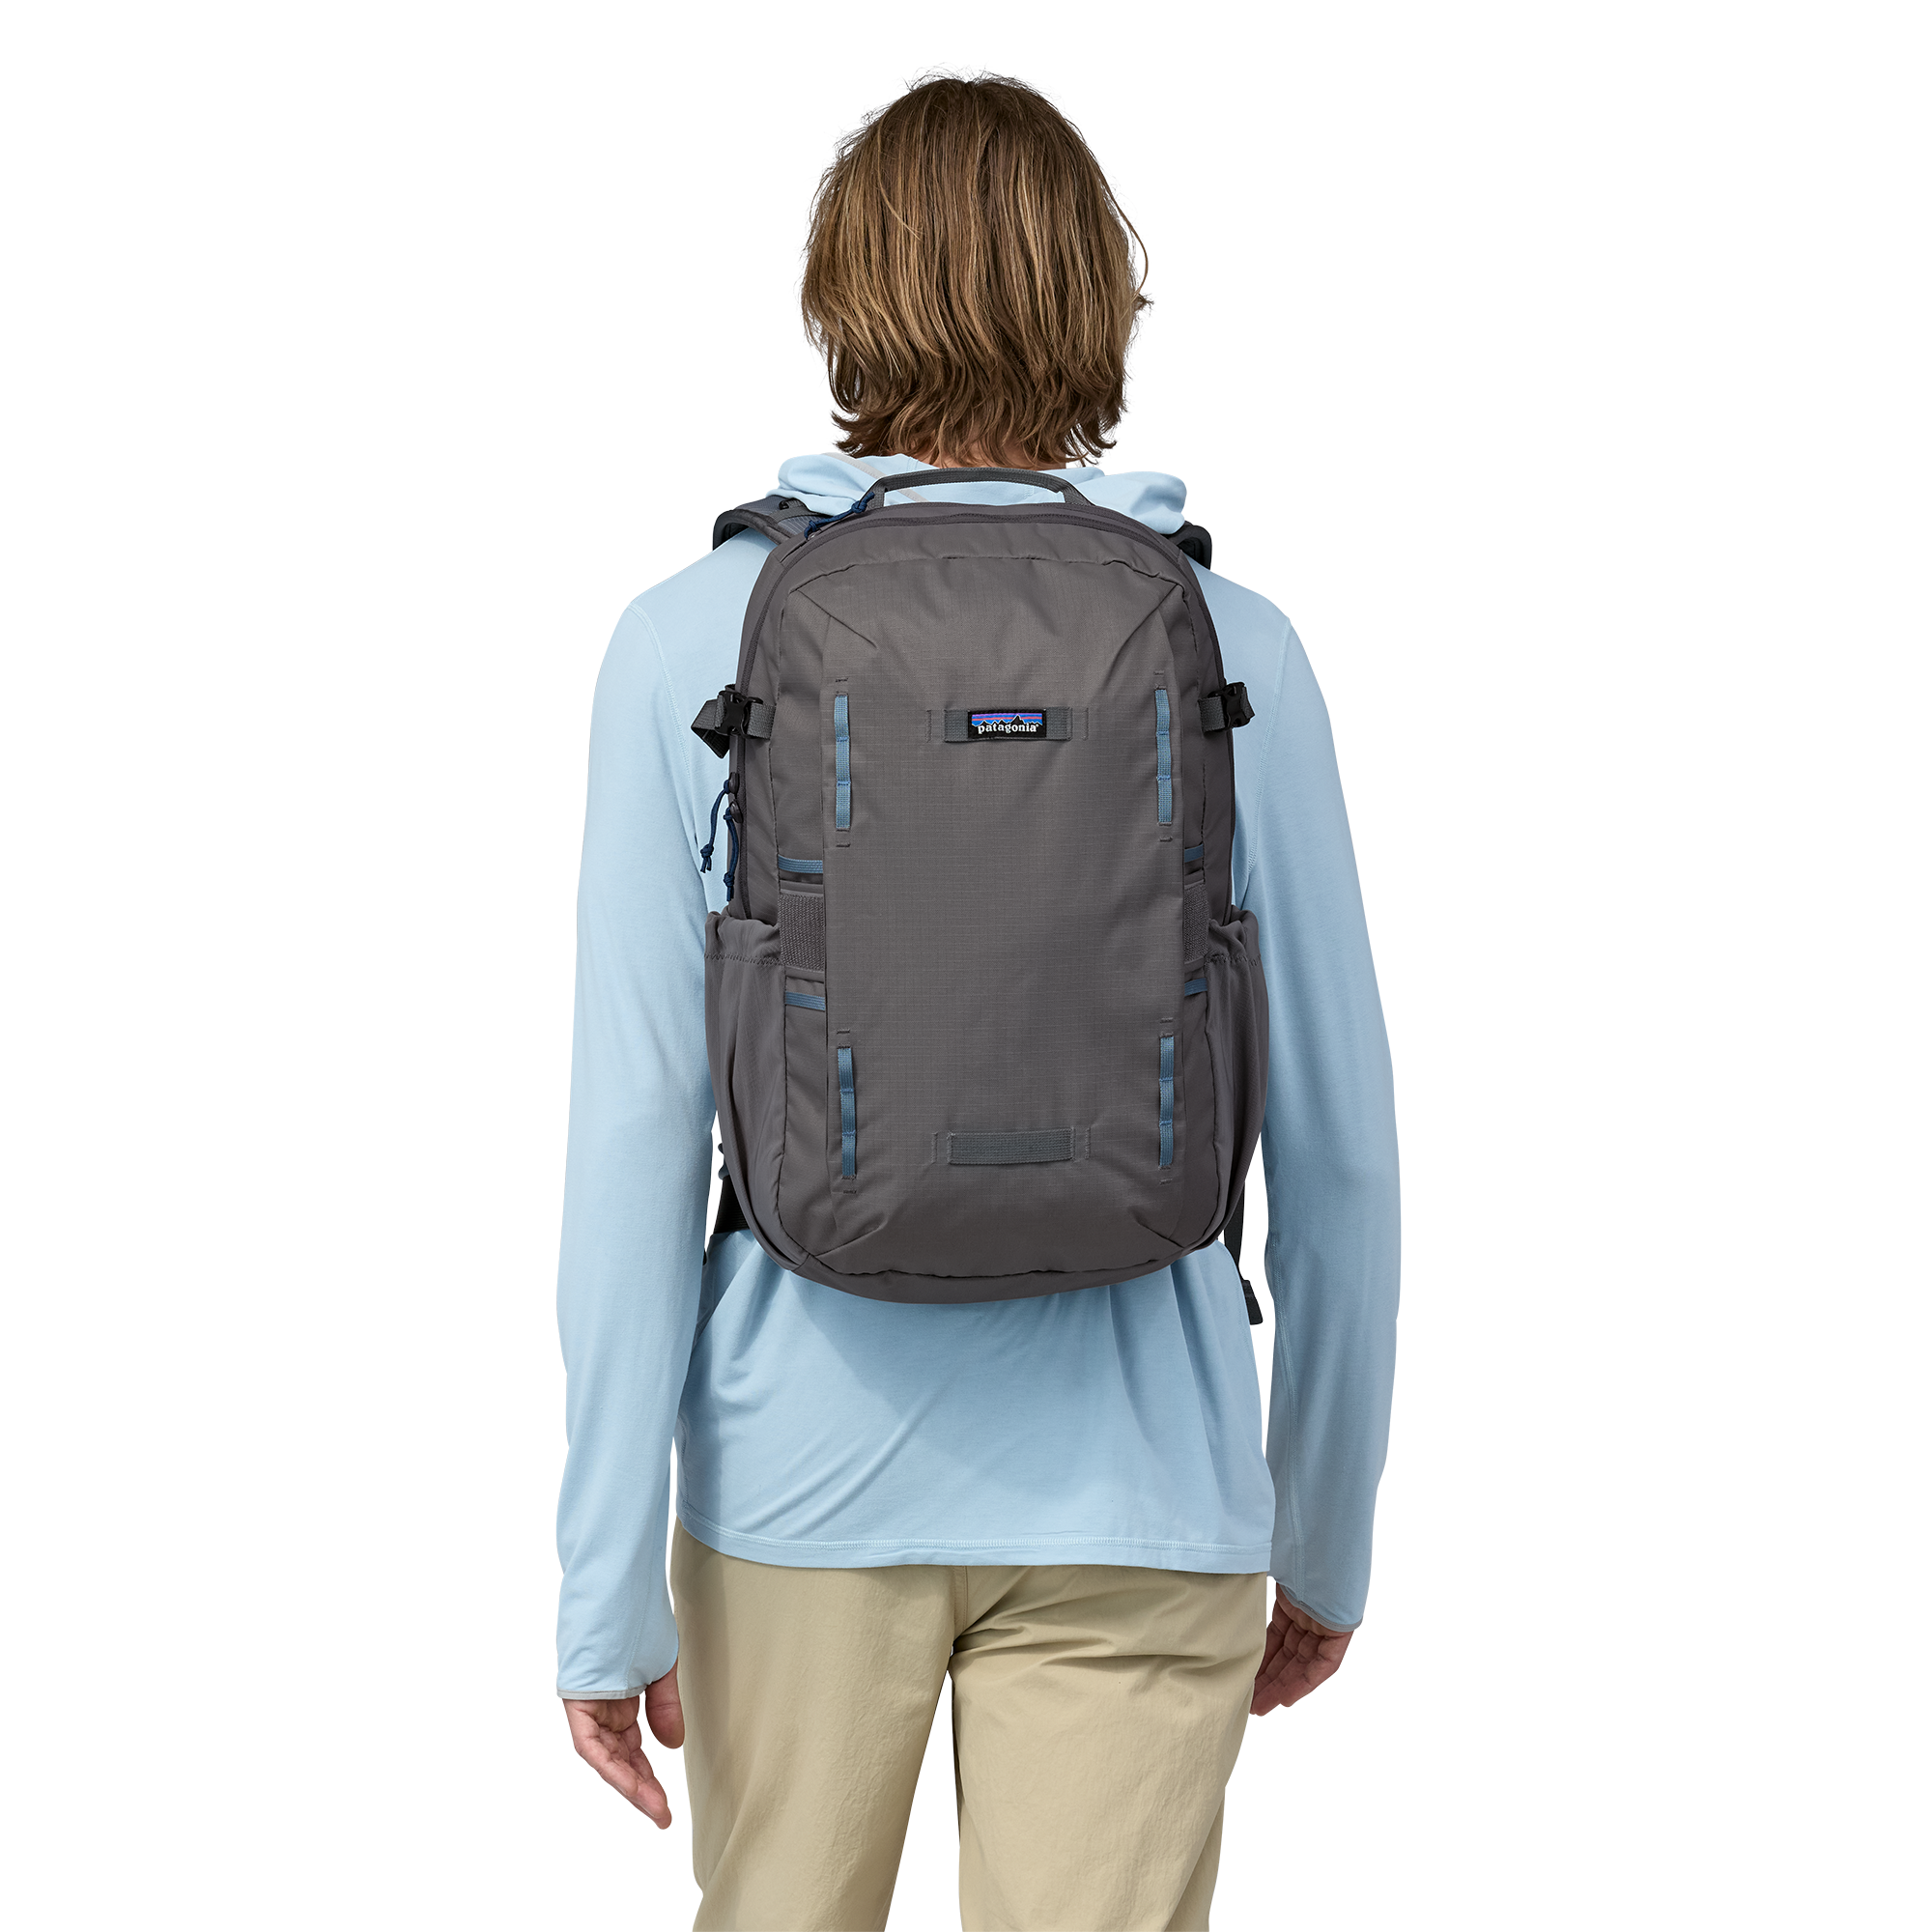 Patagonia Stealth Pack 30L - Fly Fishing Pack